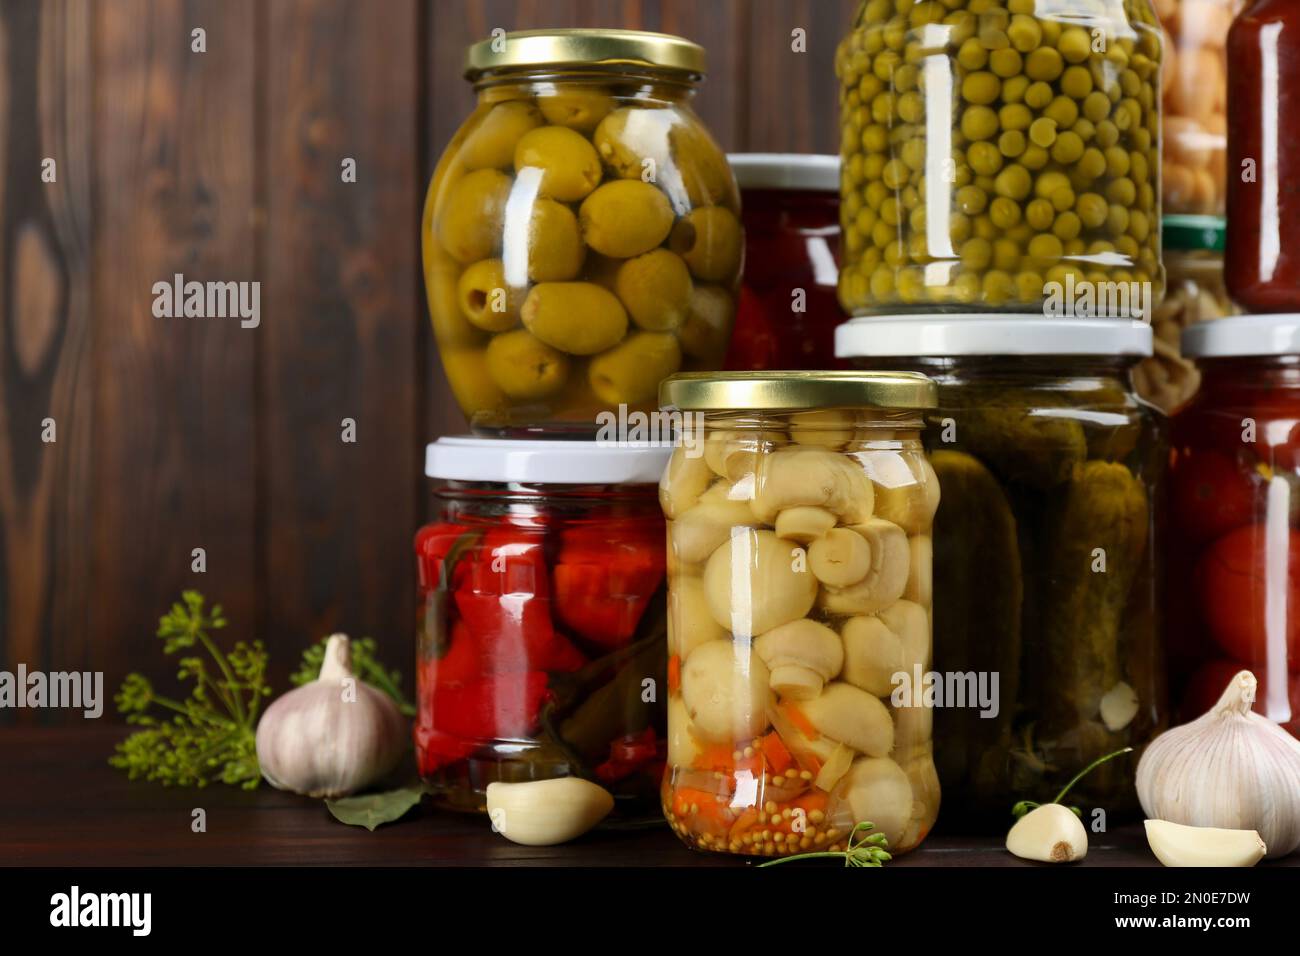 Jars of pickled vegetables on wooden table Stock Photo